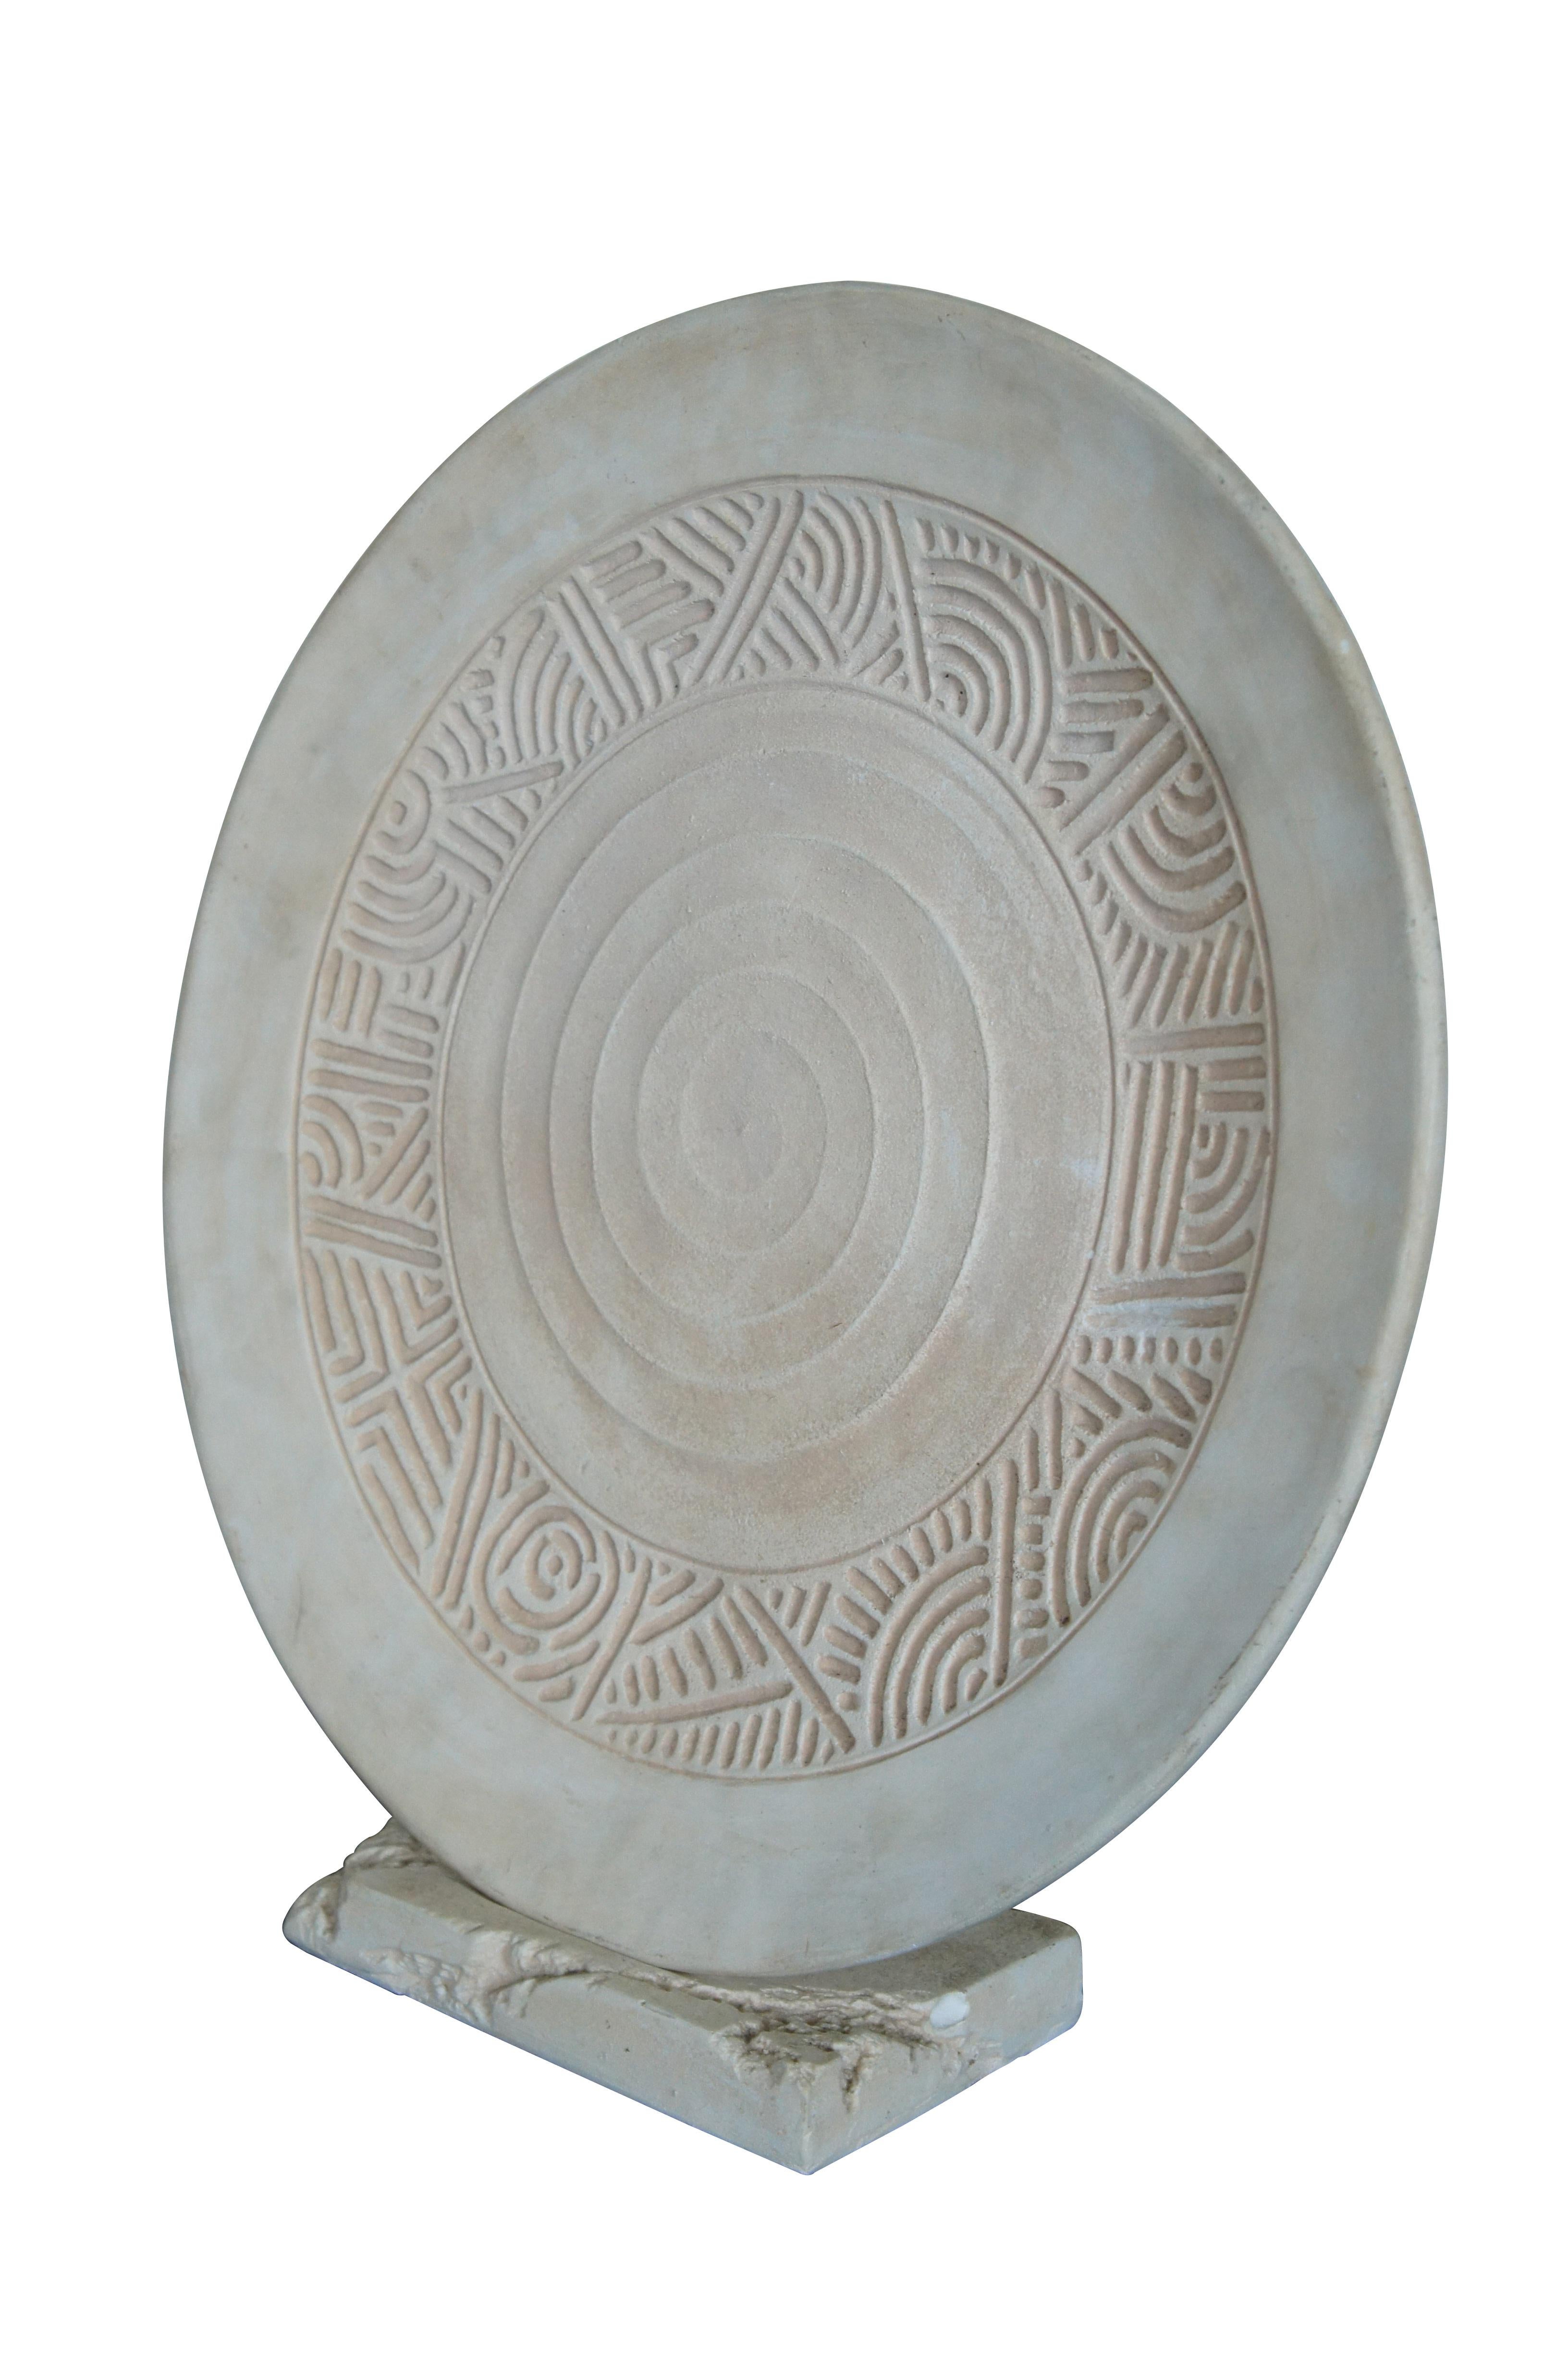 Vintage chalkware art sculpture display featuring a plate / charger / round disk with geometric patterns.  Includes base / stand.


Dimensions:
22.25” x 6” x 23.25” (Width x Depth x Height)